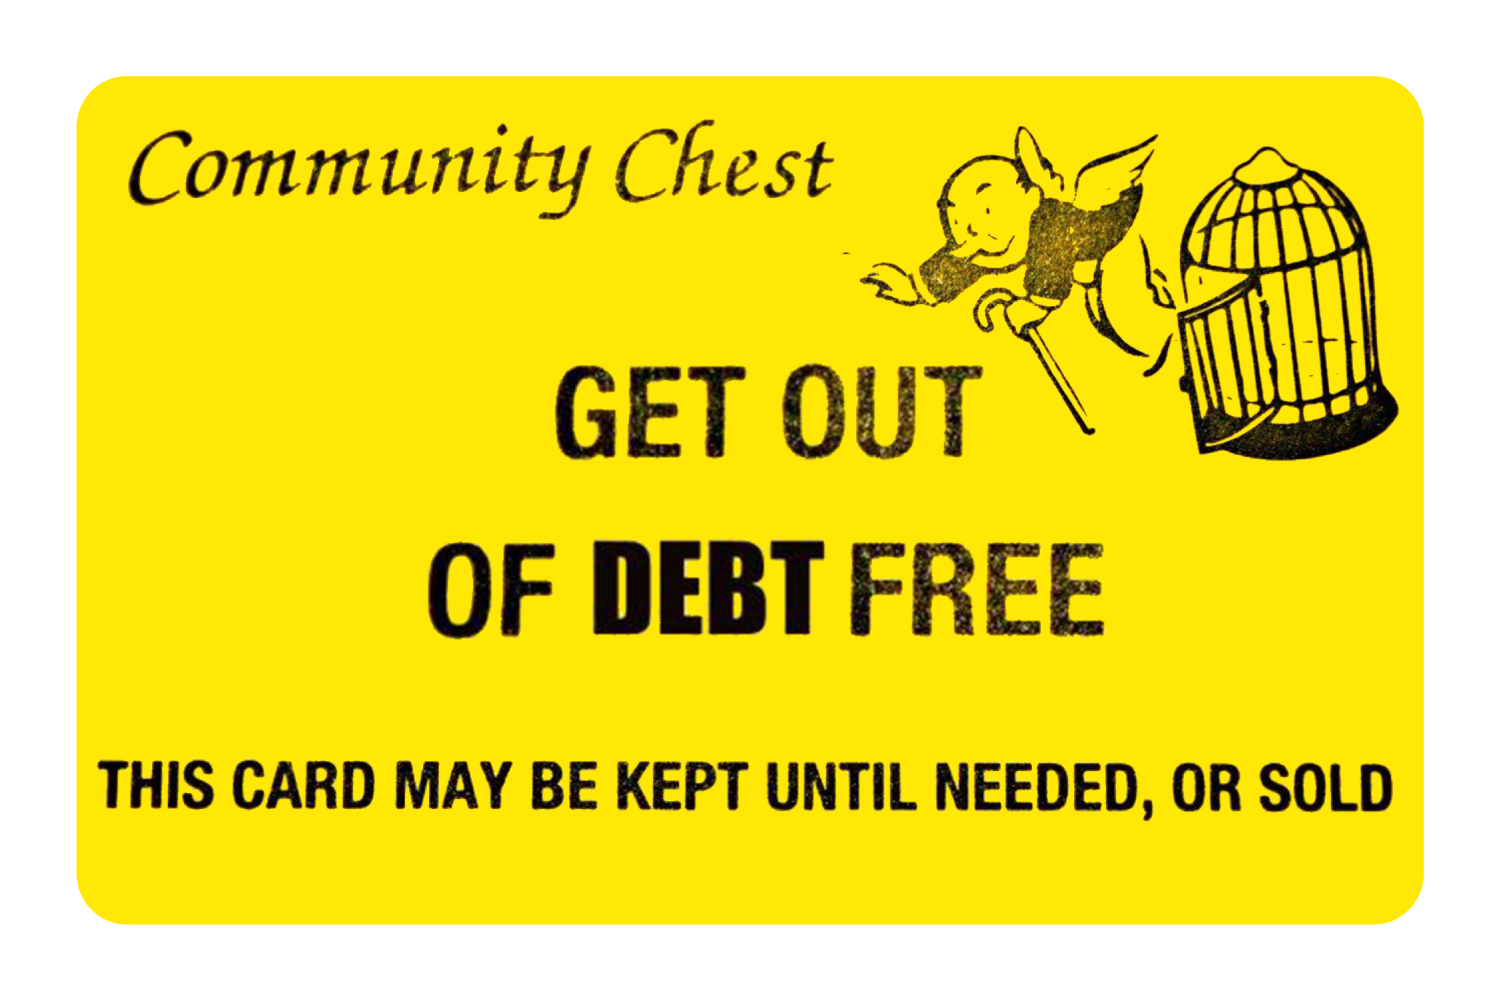 Card Get Out of Debt